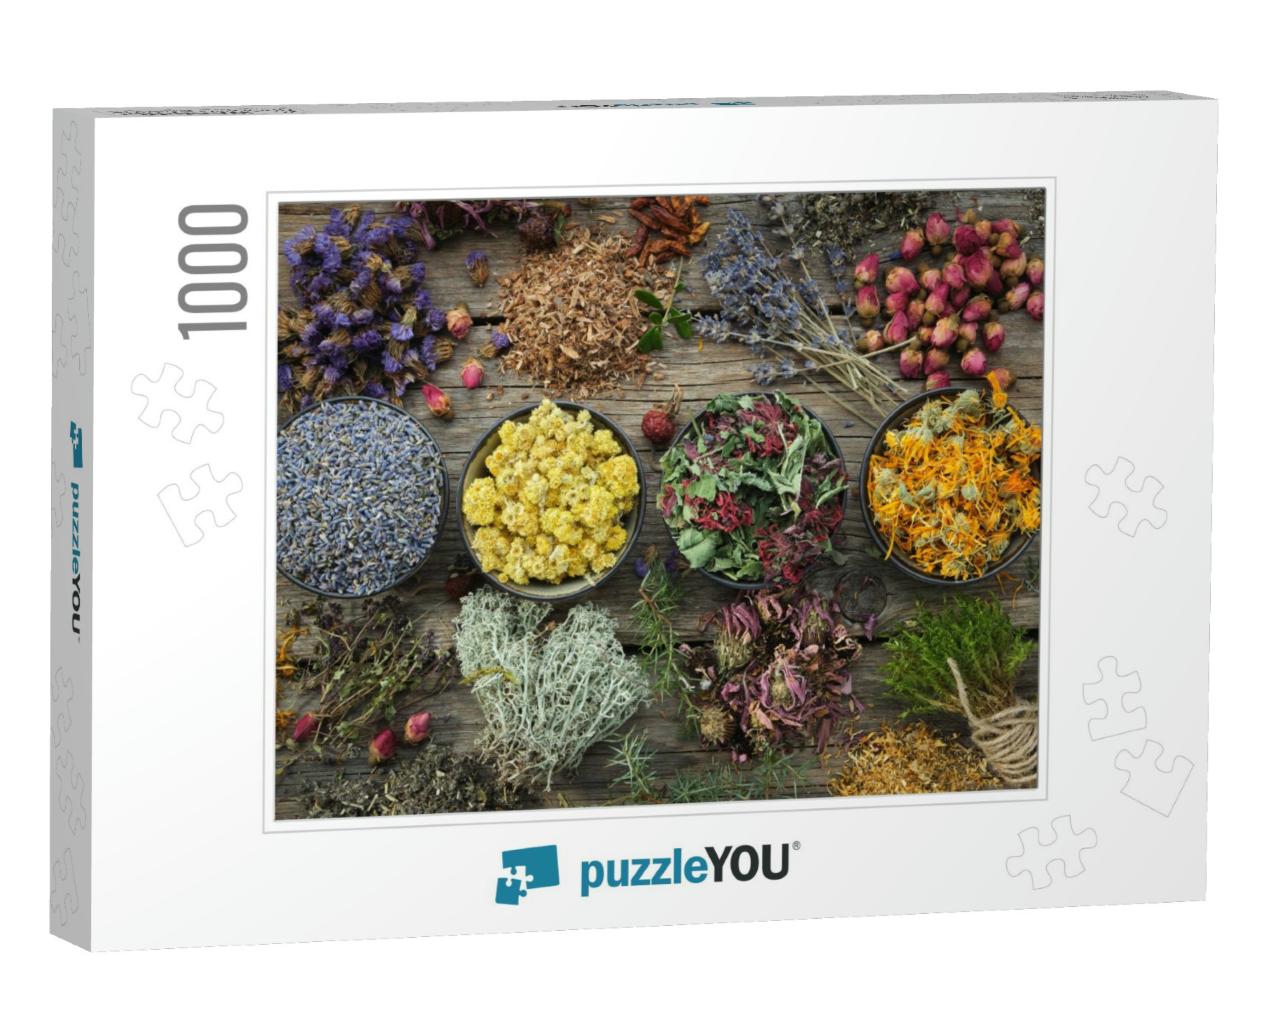 Bowls of Dry Medicinal Herbs - Lavender, Coneflower, Mari... Jigsaw Puzzle with 1000 pieces